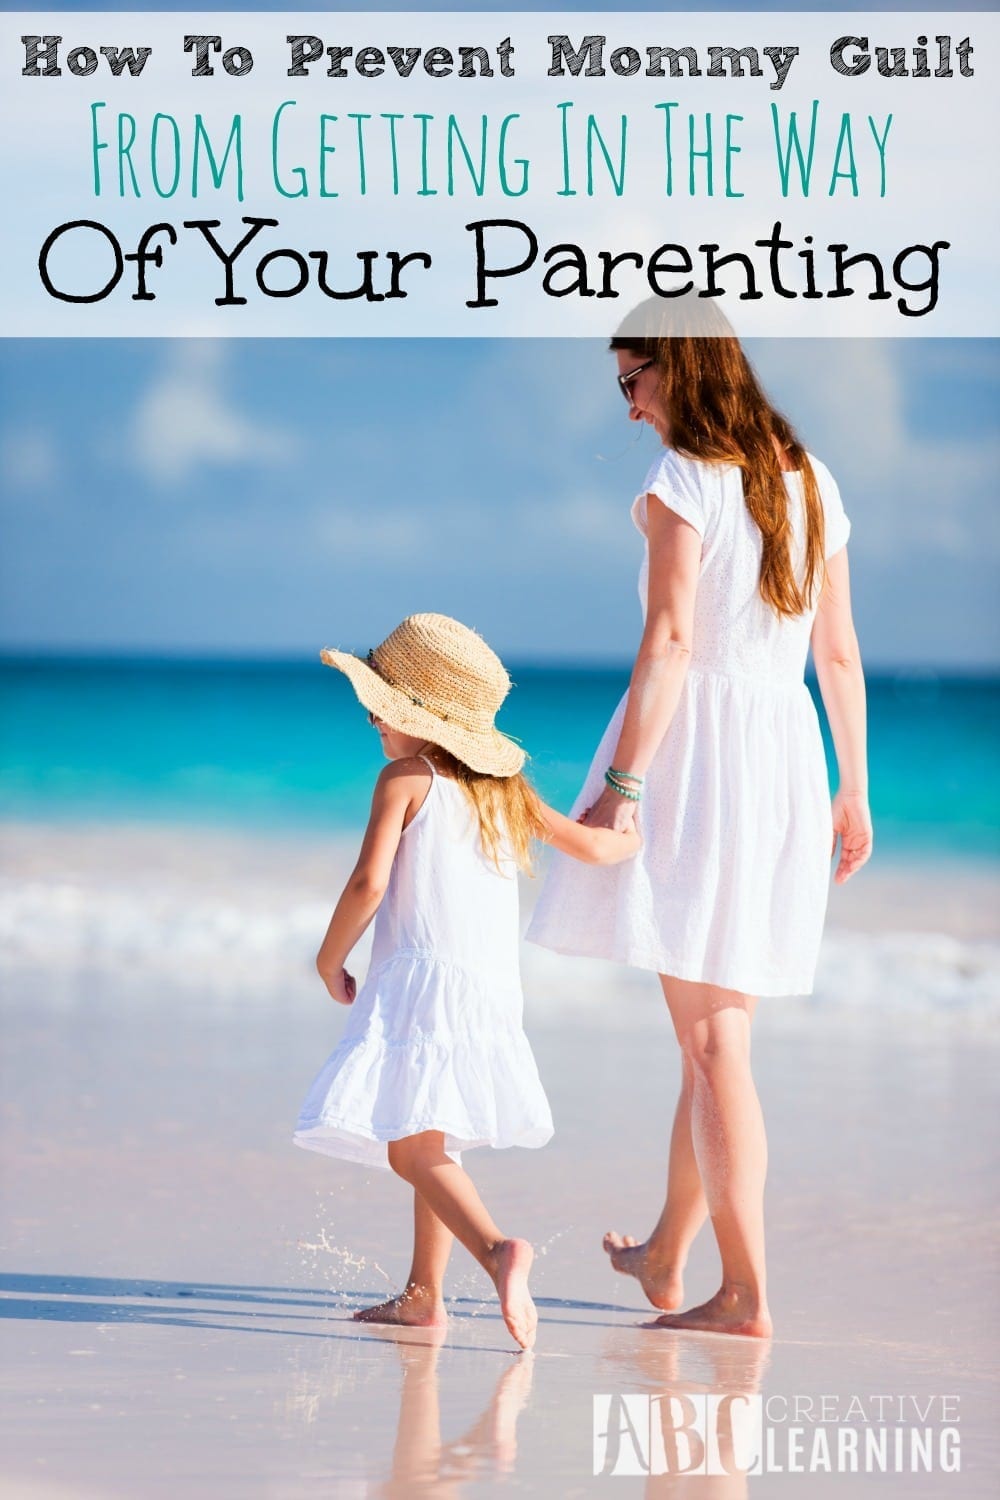 How To Prevent Mommy Guilt From Getting In The Way of Your Parenting